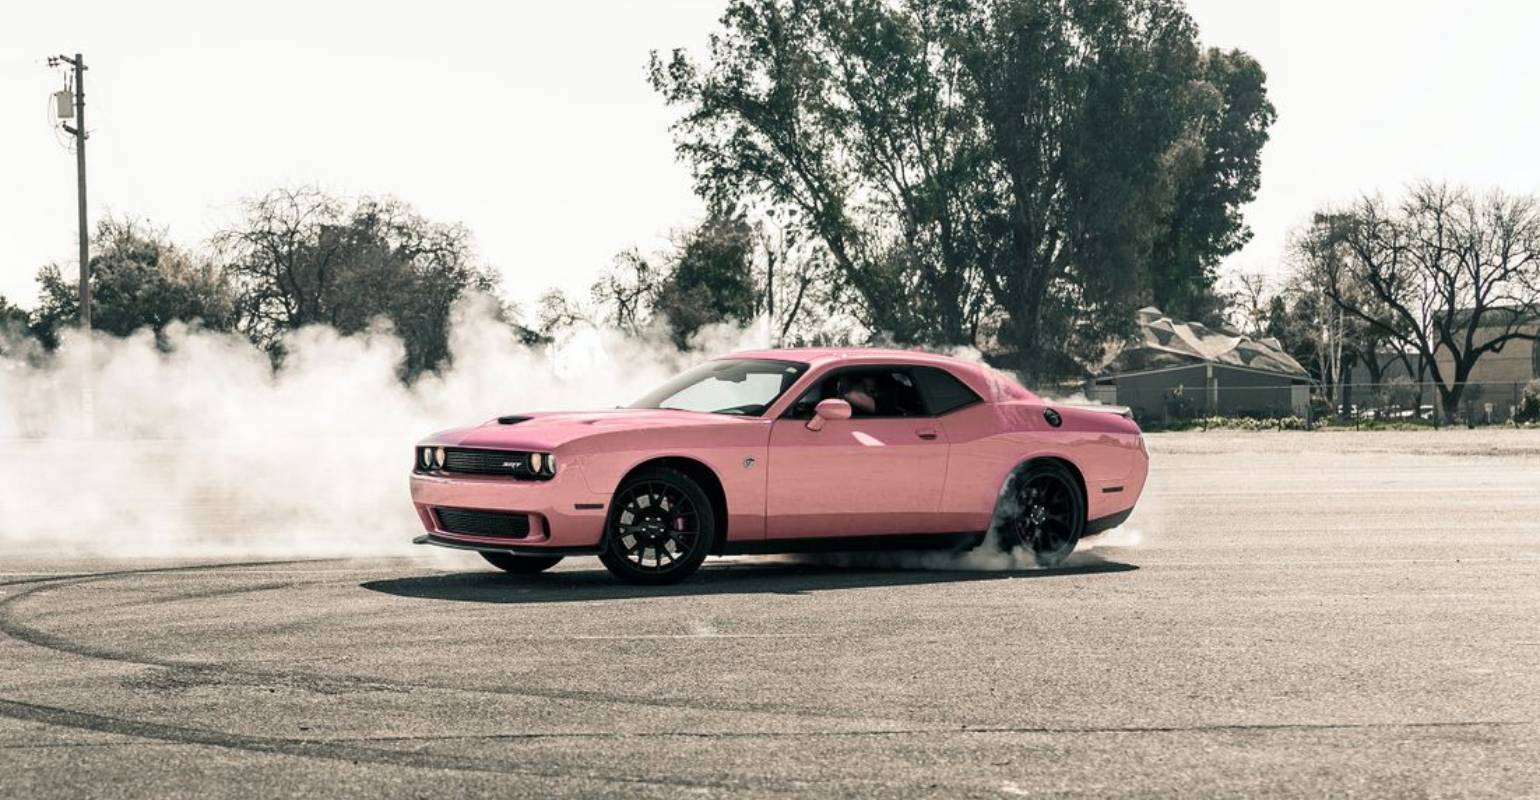 A pink car on the ground